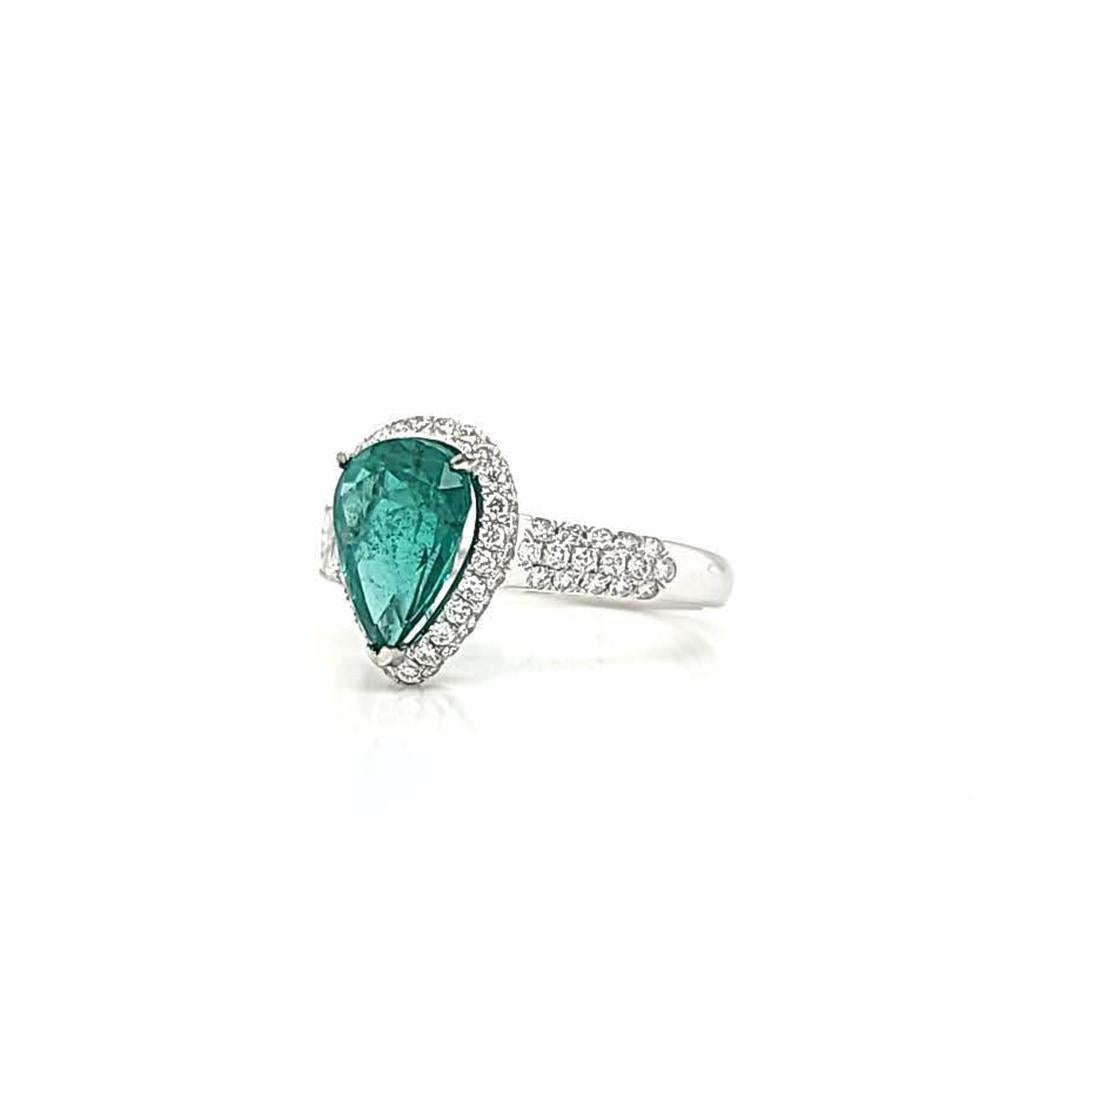 2.67 CT Zambian Emerald & 1.10 CT Diamonds in 14K White Gold Engagement Ring For Sale 2